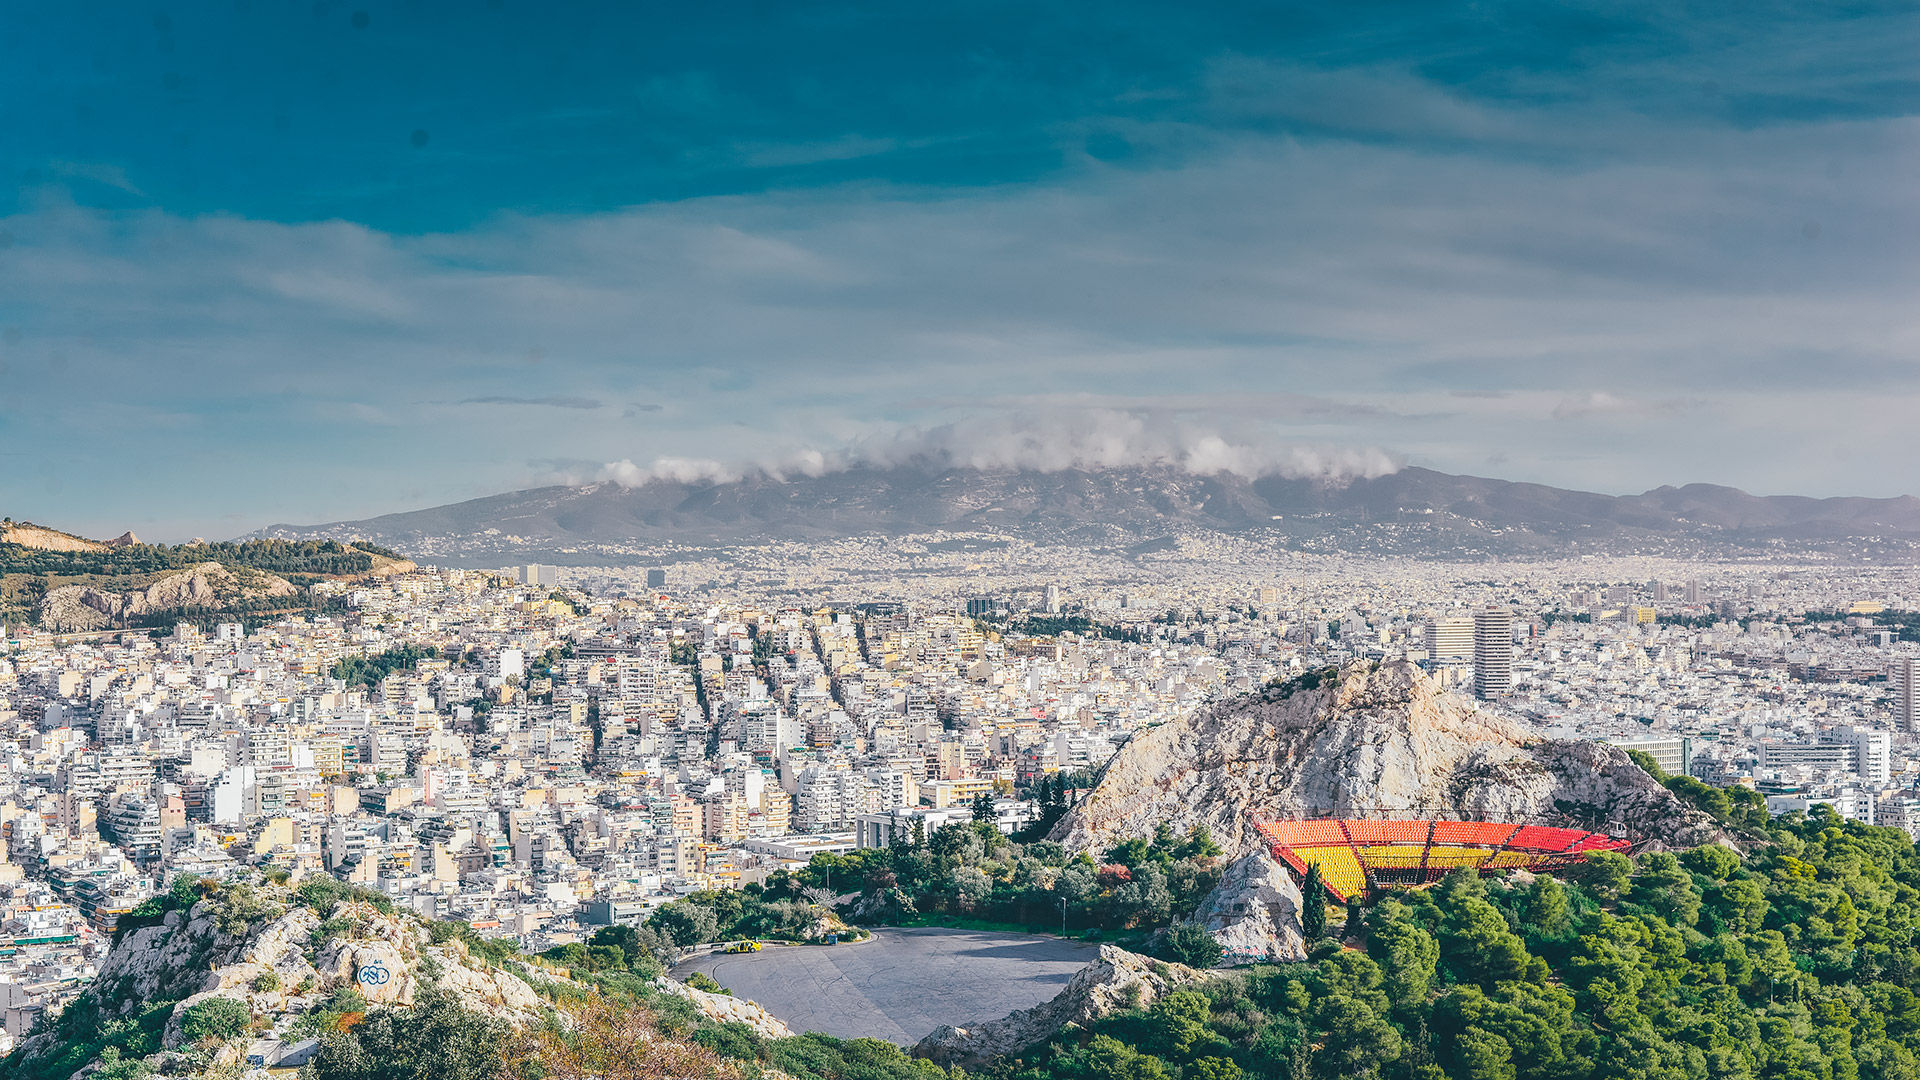 Lycabettus hill, the highest spot of Athens